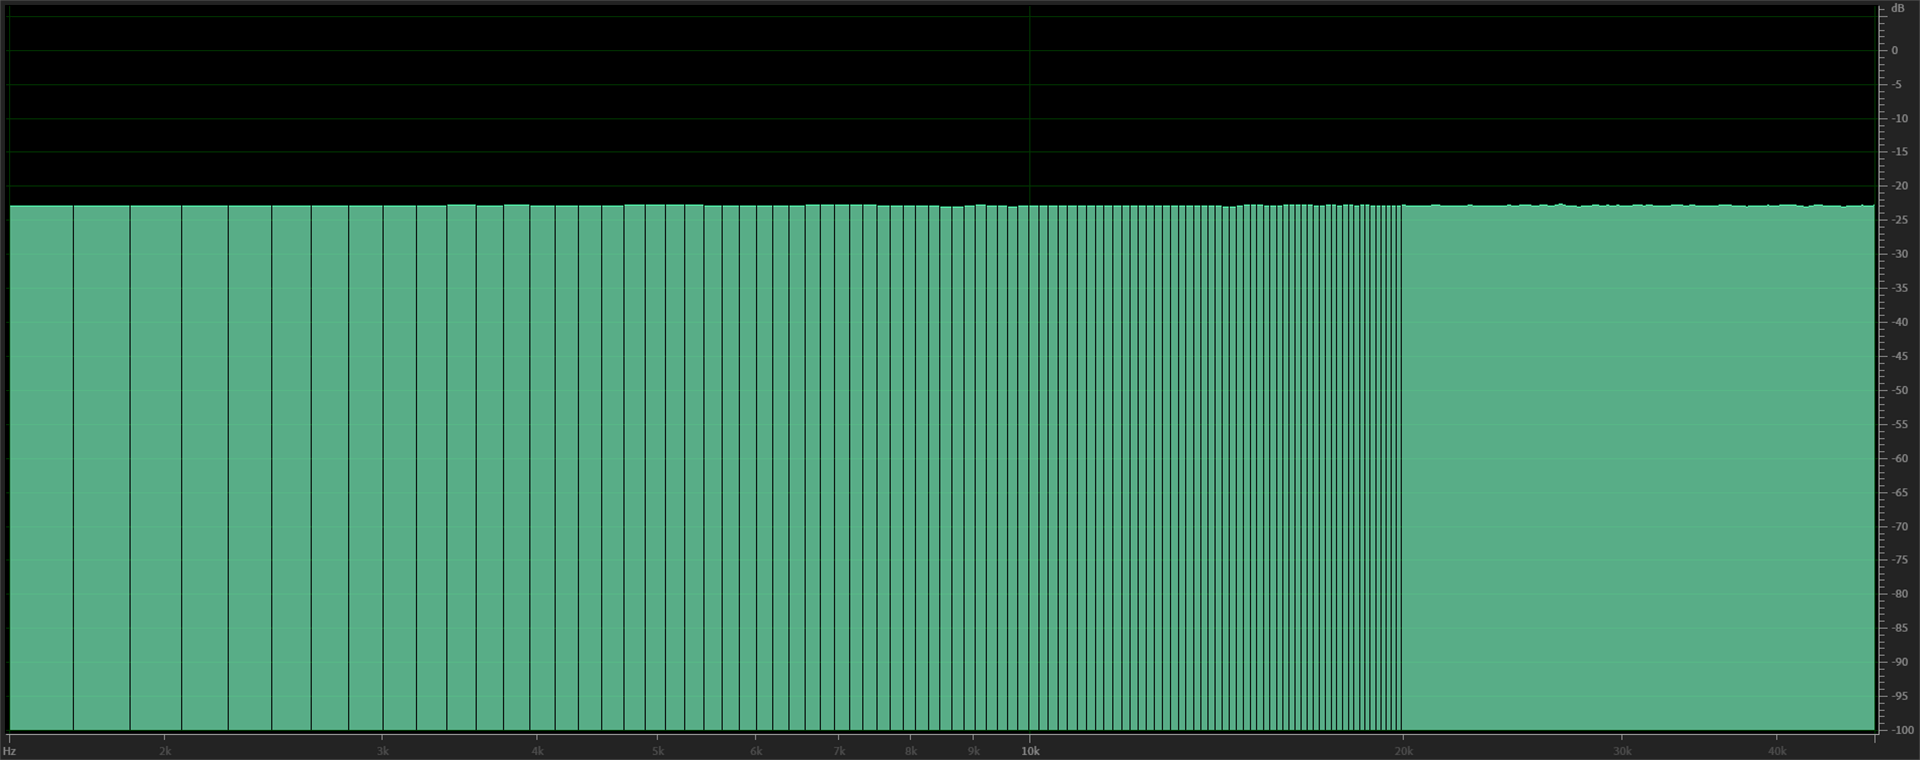 A plot of a frequency analysis showing equal energy over all bands.